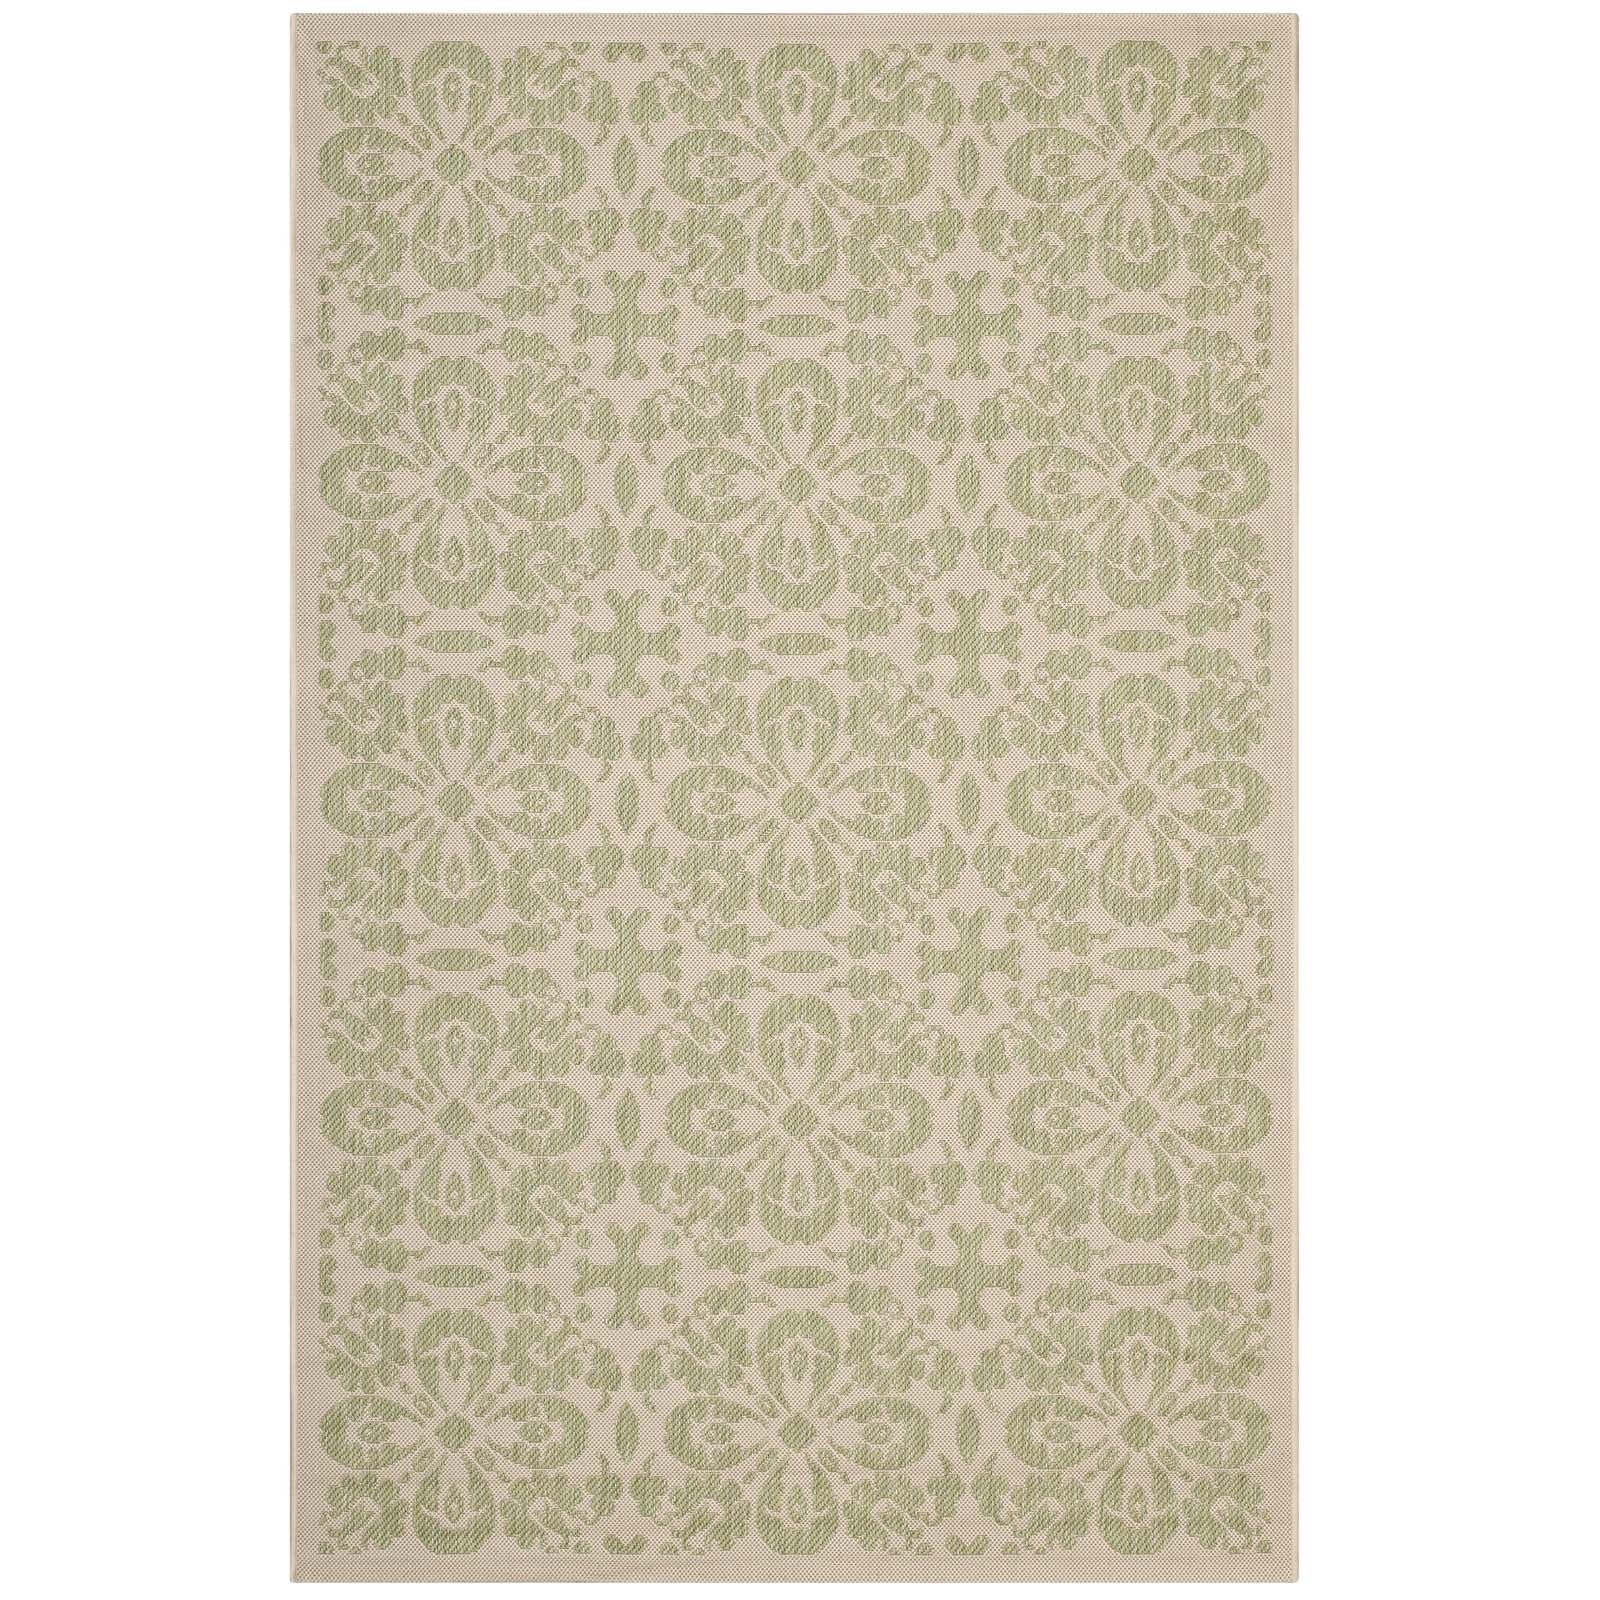 Modway Outdoor Rugs - Ariana Floral Trellis 5'x8' Outdoor Area Rug Light Green & Beige